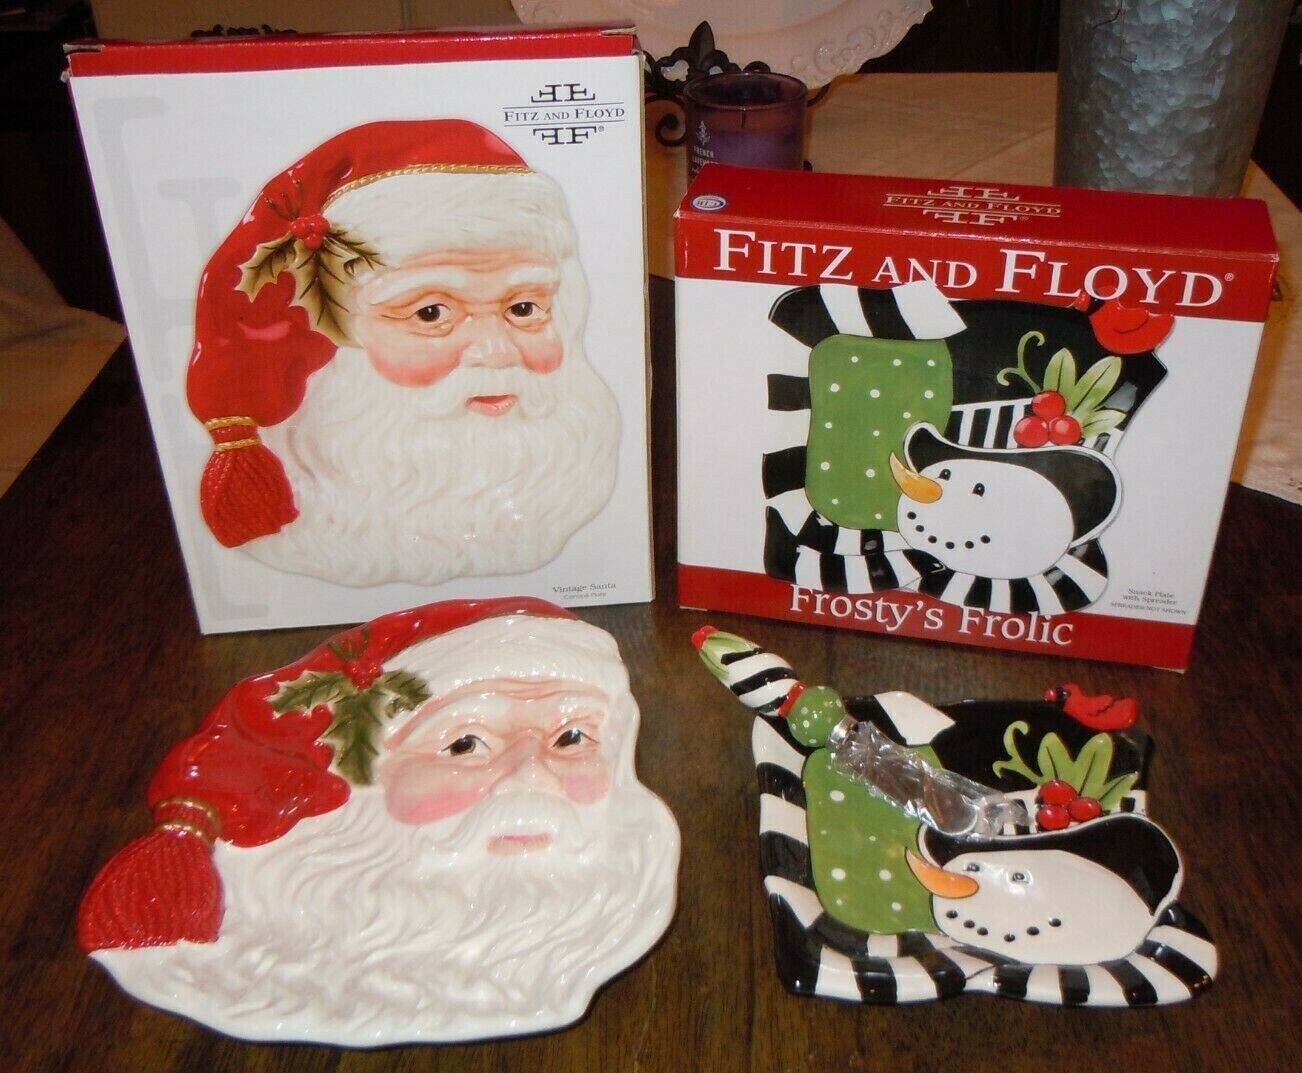 Fitz & Floyd Christmas VTG Santa Canape Wall Décor & Frost's Frolic Snack Plate - $49.99